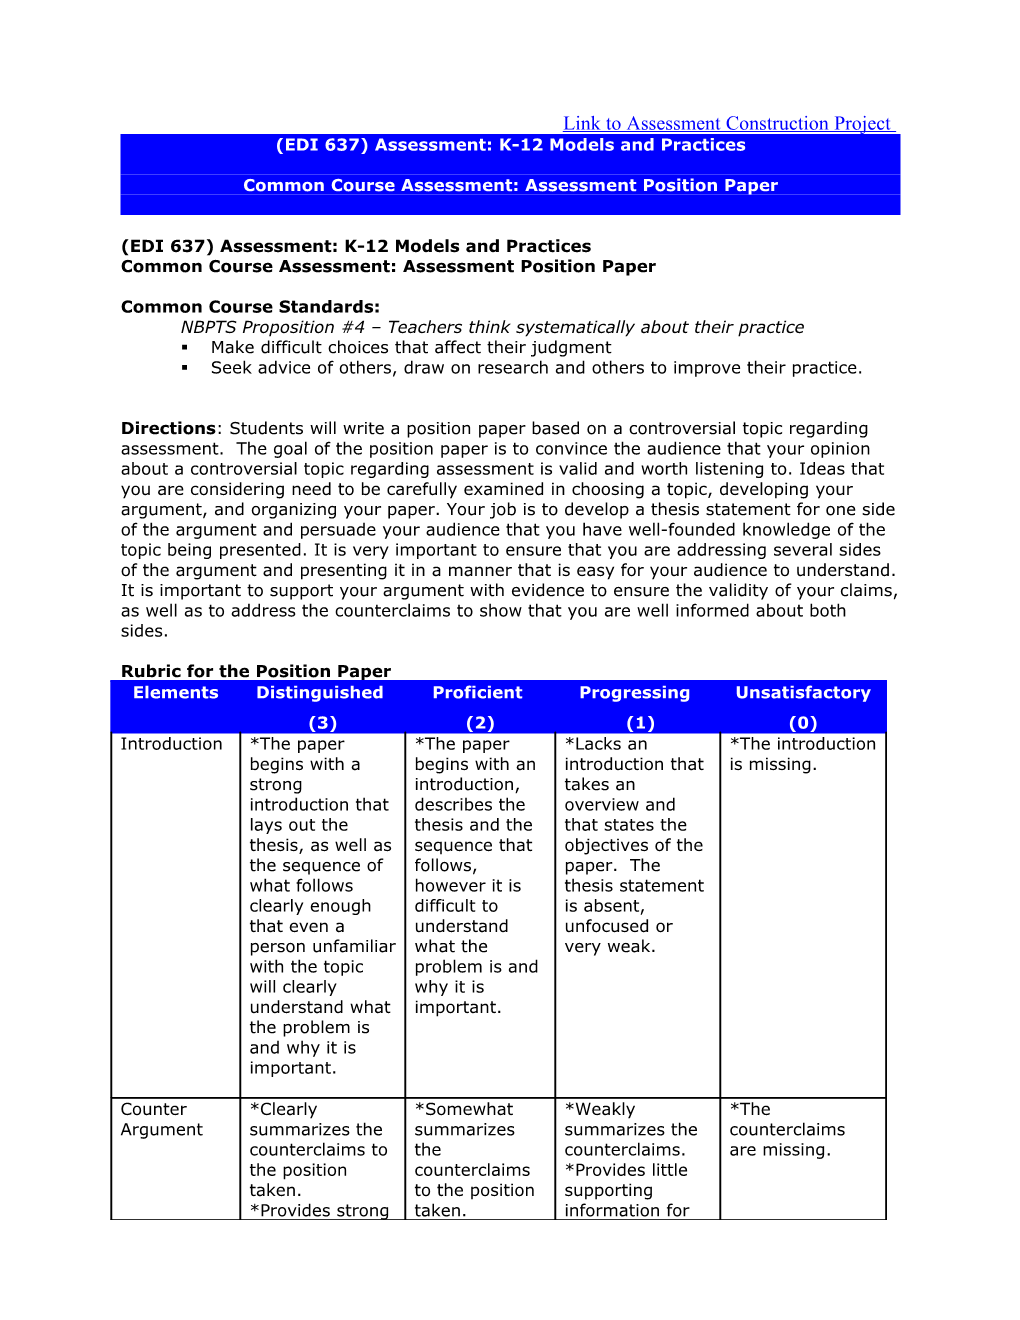 ED630 Common Course Assessment: Curriculum Problem Research Paper/Project